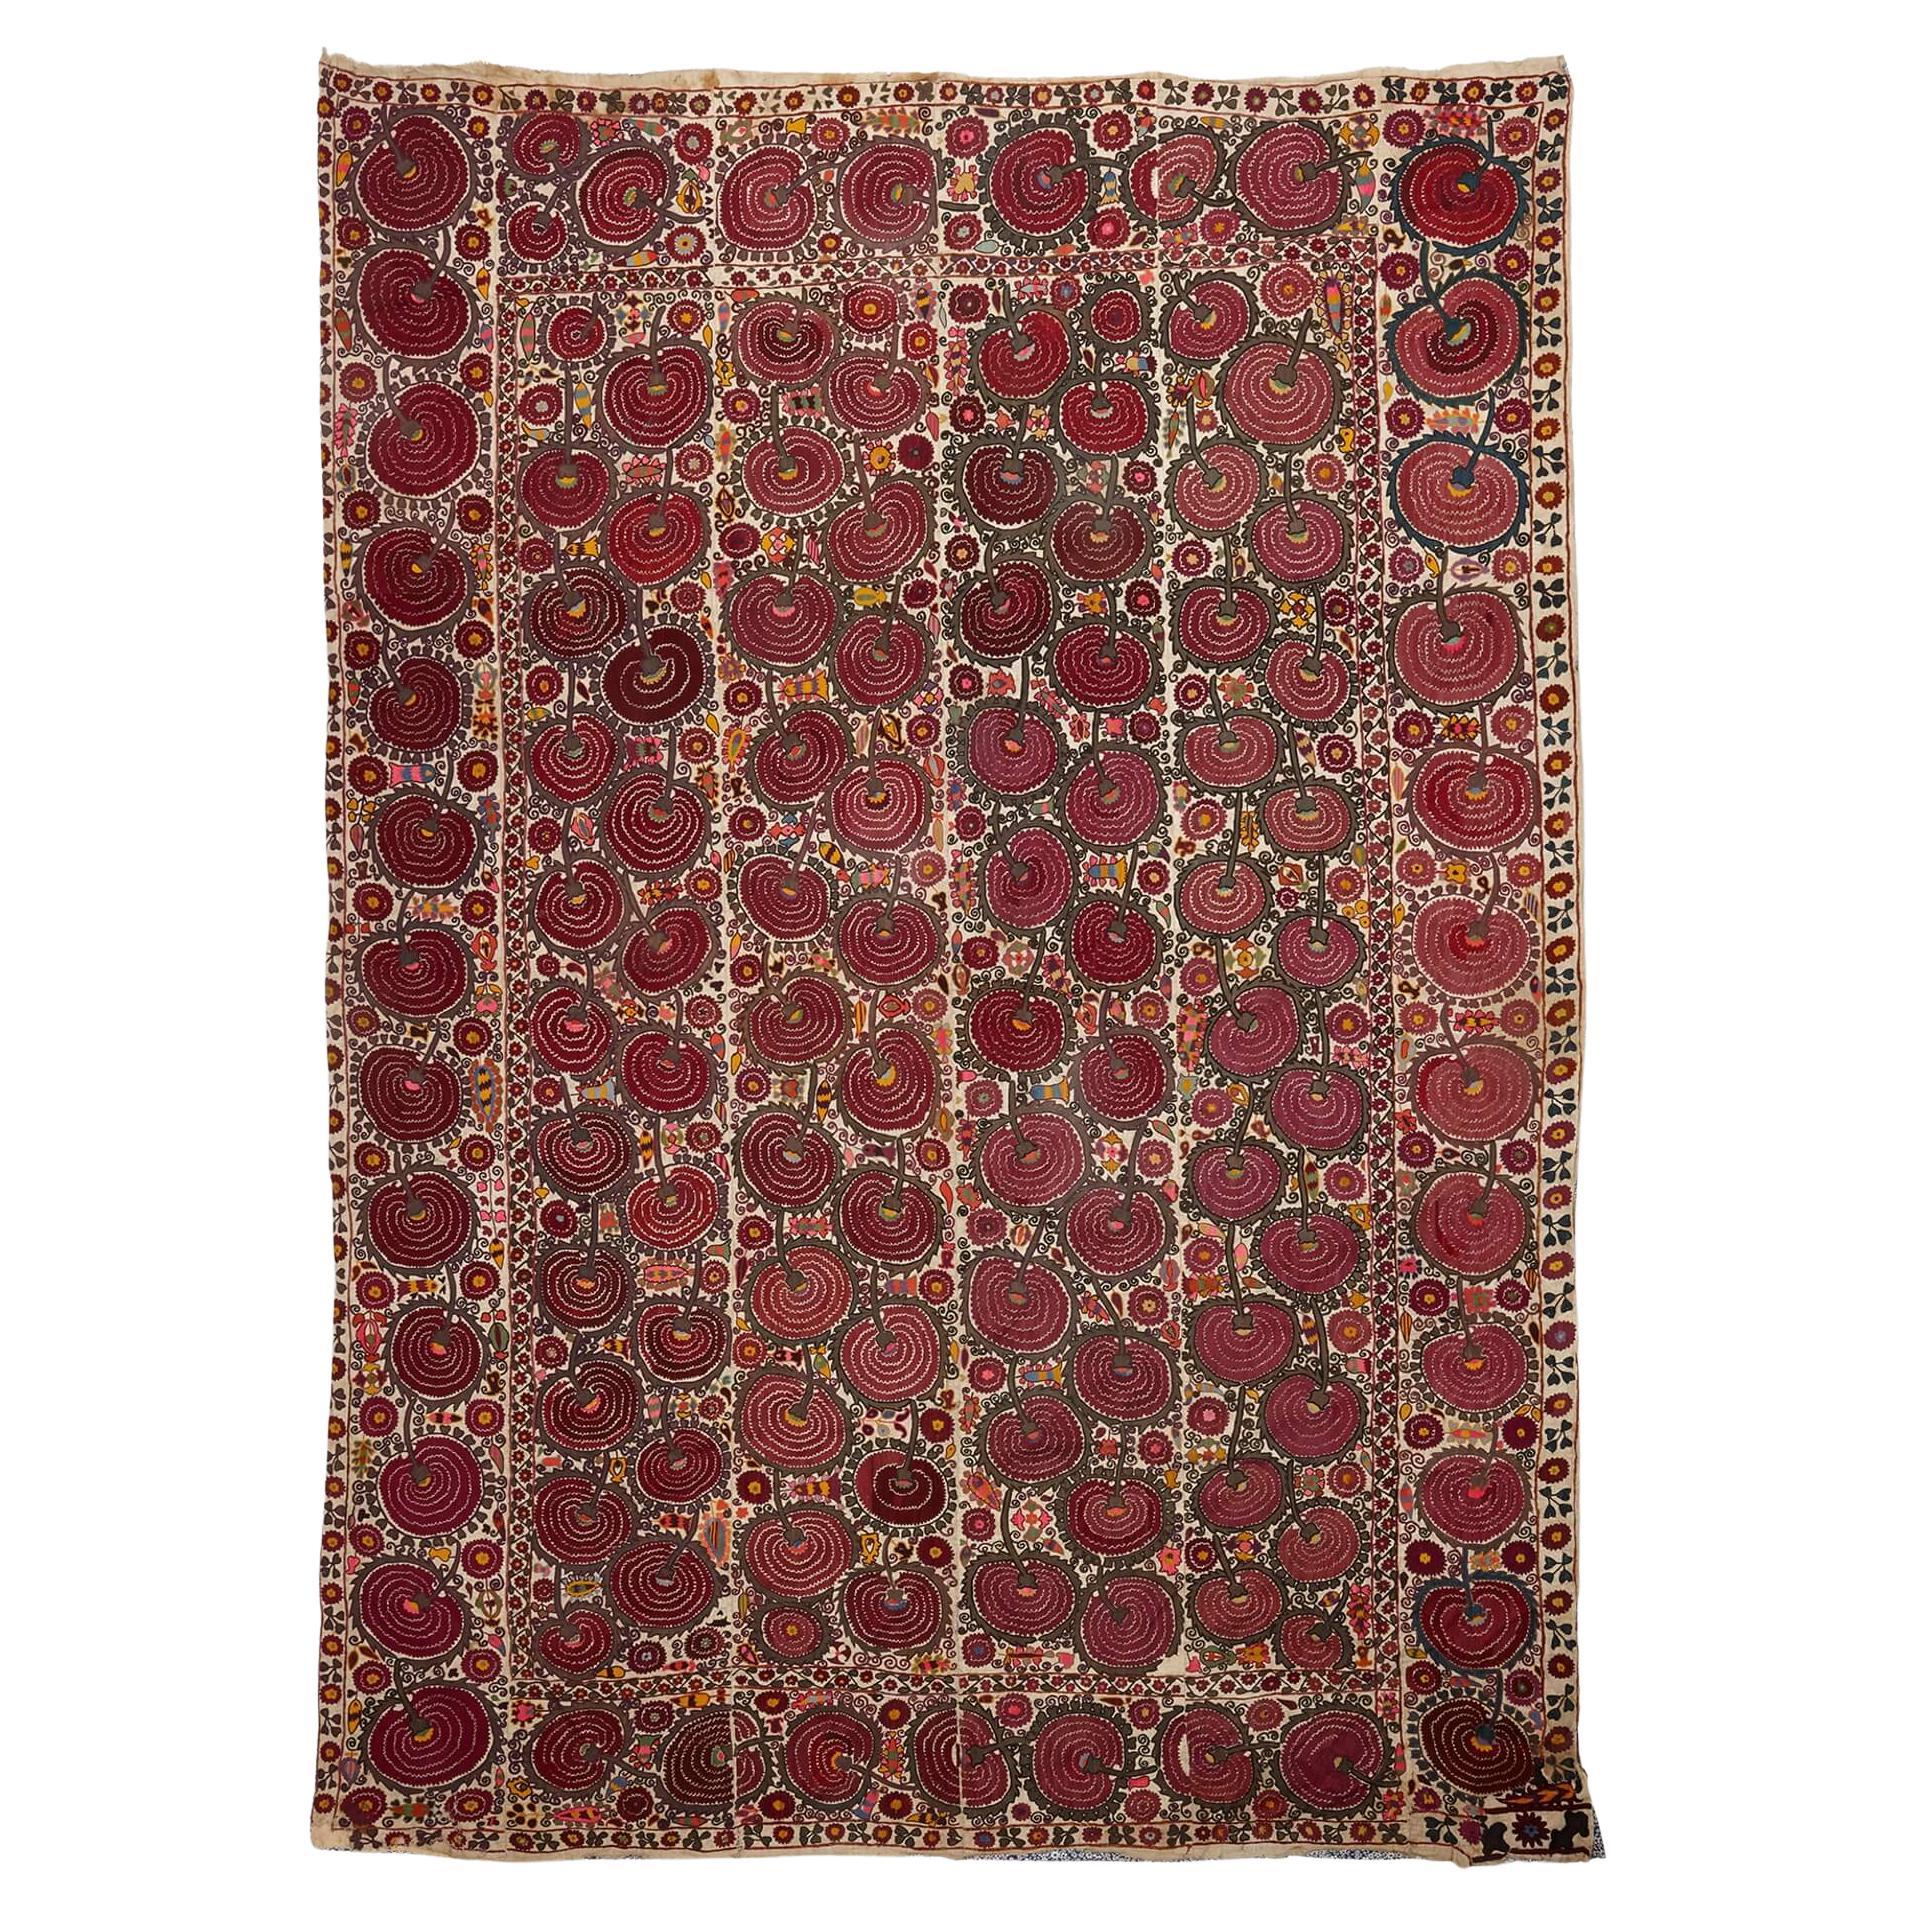 Large 19th Century Hand-Embroidered Bukhara Suzani For Sale